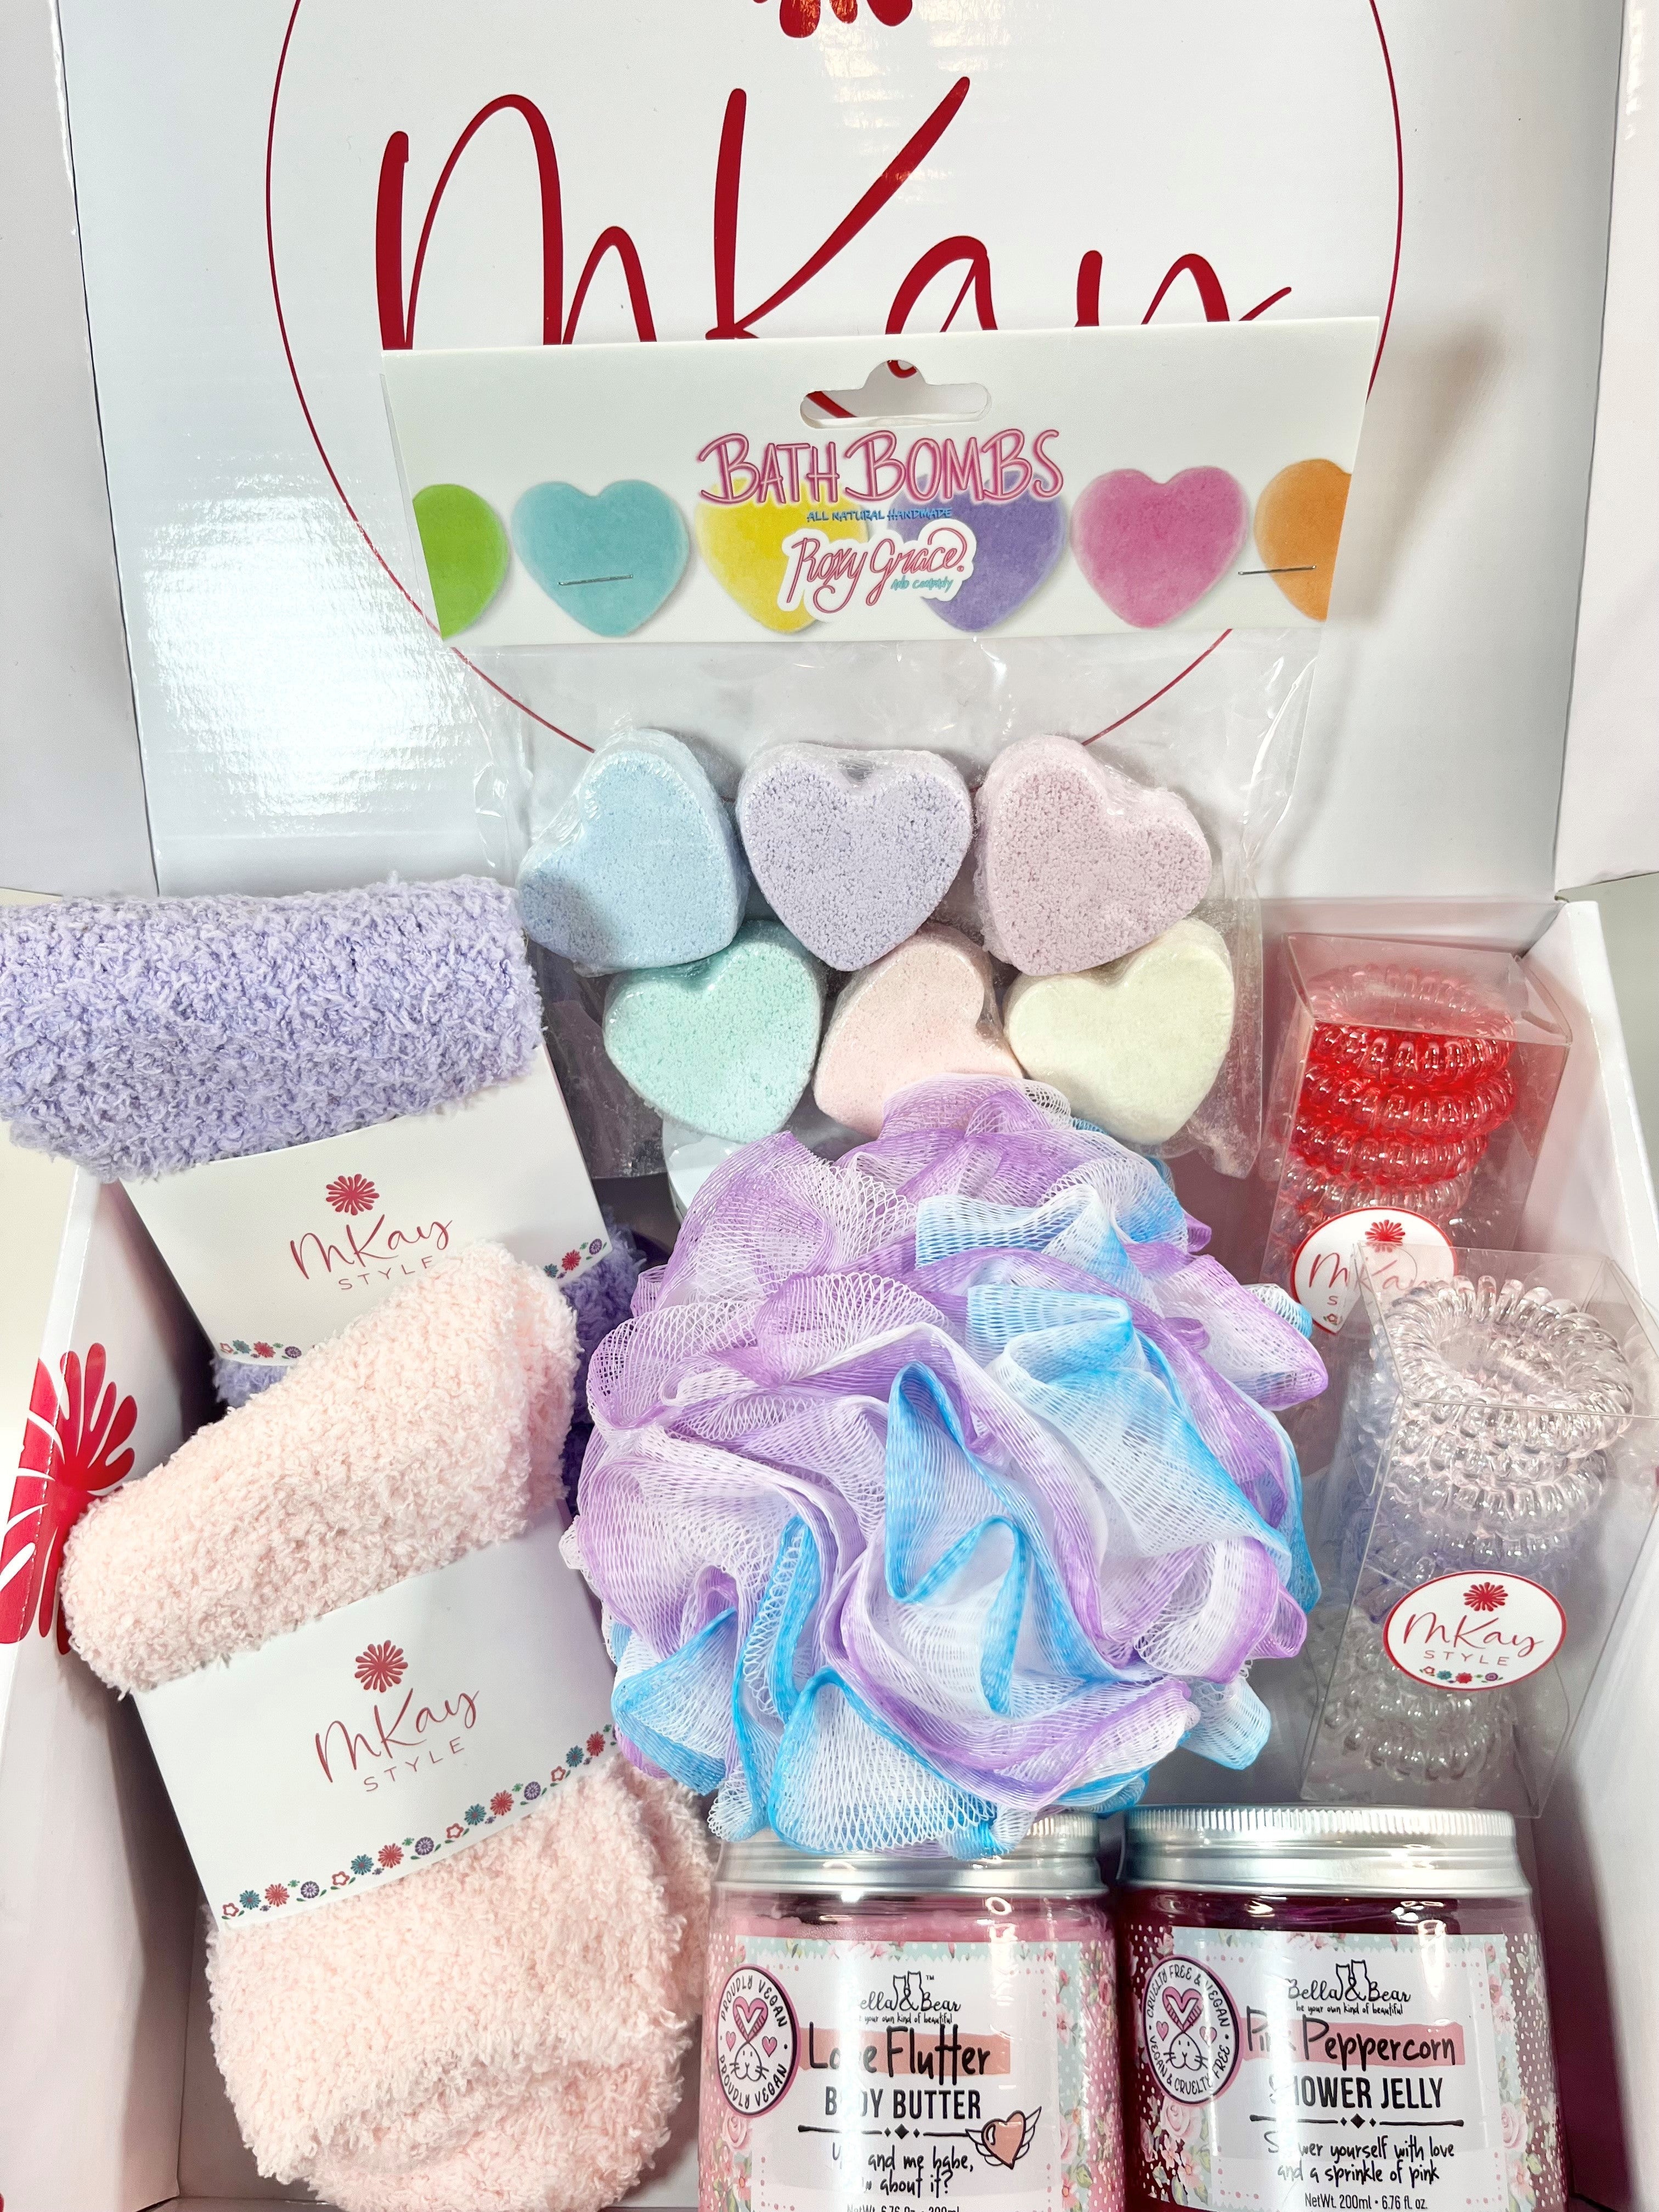 Valentine's Day Gifts, Valentine's Day Gift, Valentine's Day Box, Valentine Gift College Girl, College Student Gift, Valentine's Day Spa Box, Valentine's Day, Daughter Valentine, Tween Girl Valentine, Gifts For Friends